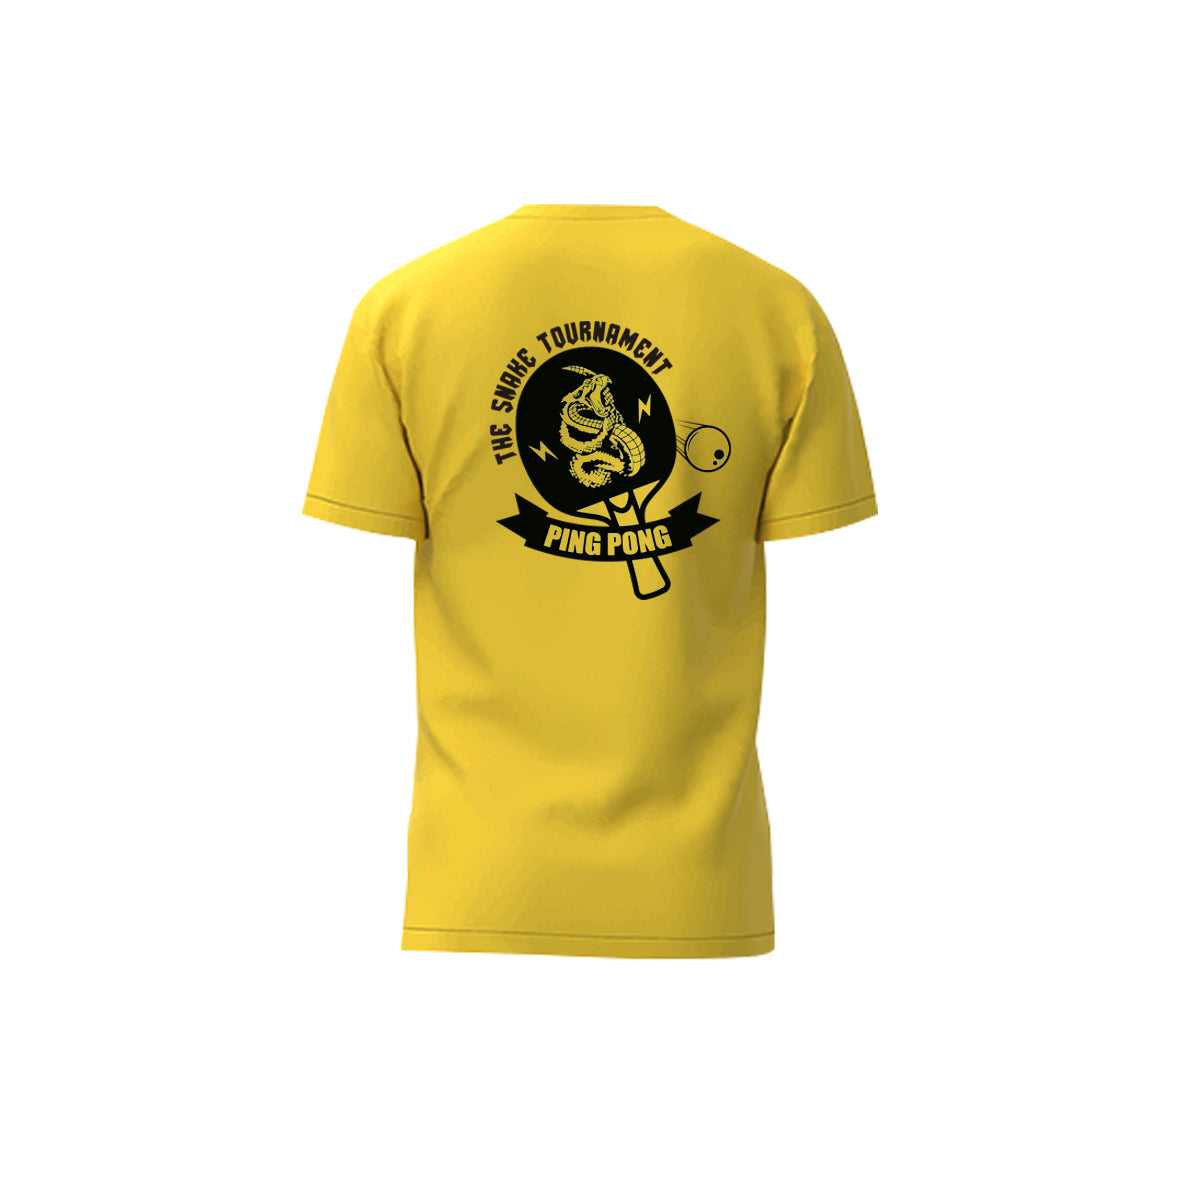 The Snake Tournament of Ping Pong - 1st Edition - T-Shirt